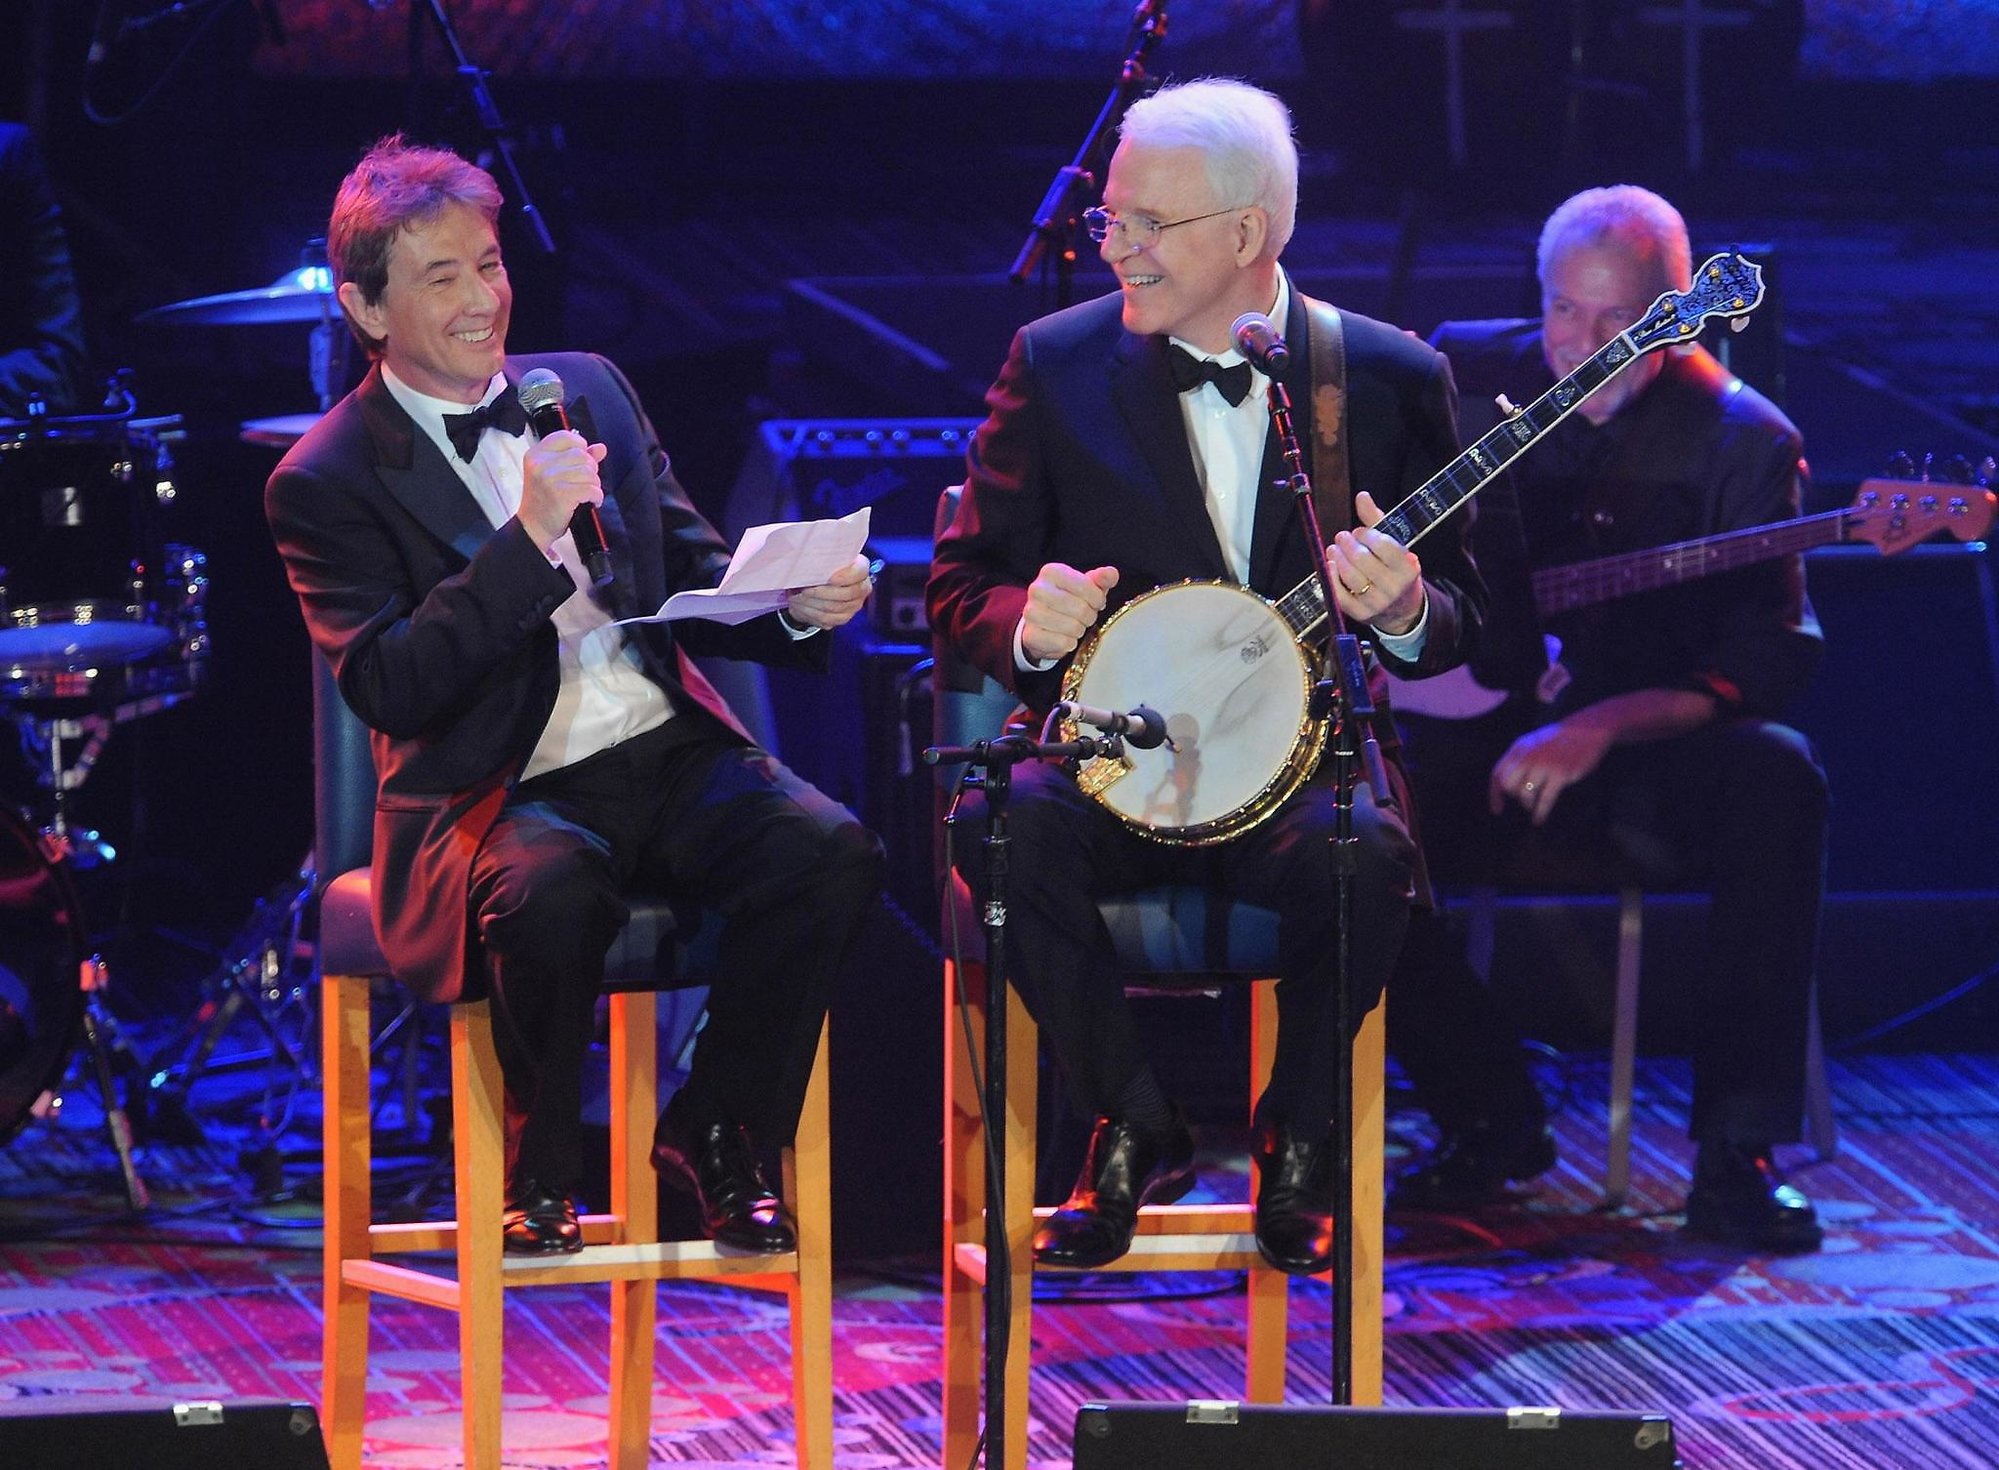 Steve Martin And Martin Short's Awesome Performance Graces San Diego